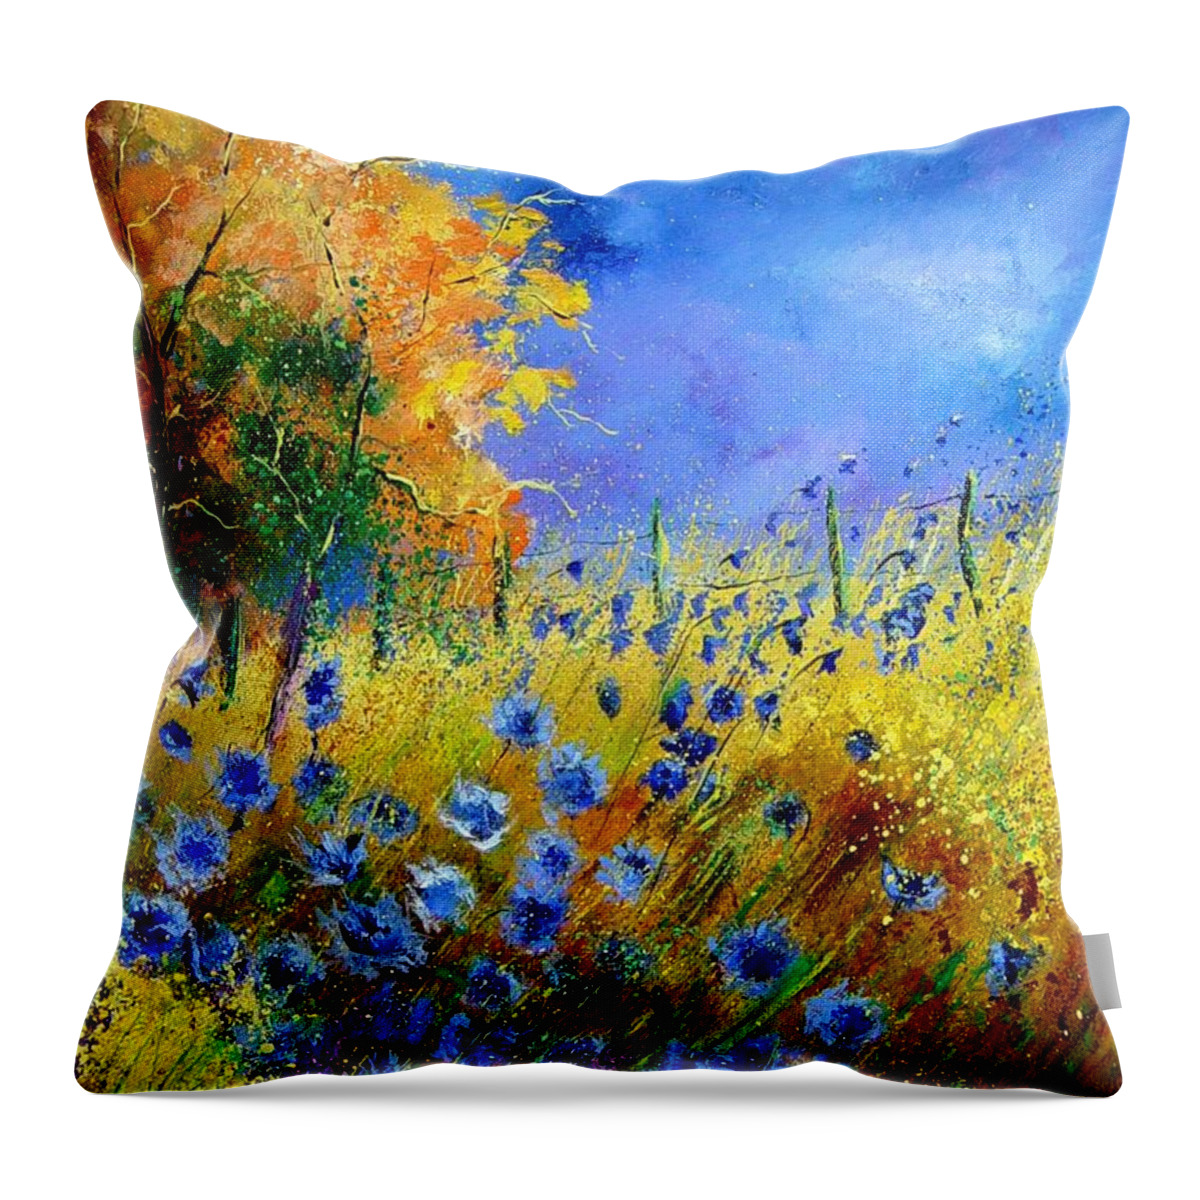 Poppies Throw Pillow featuring the painting Orange tree and blue cornflowers by Pol Ledent